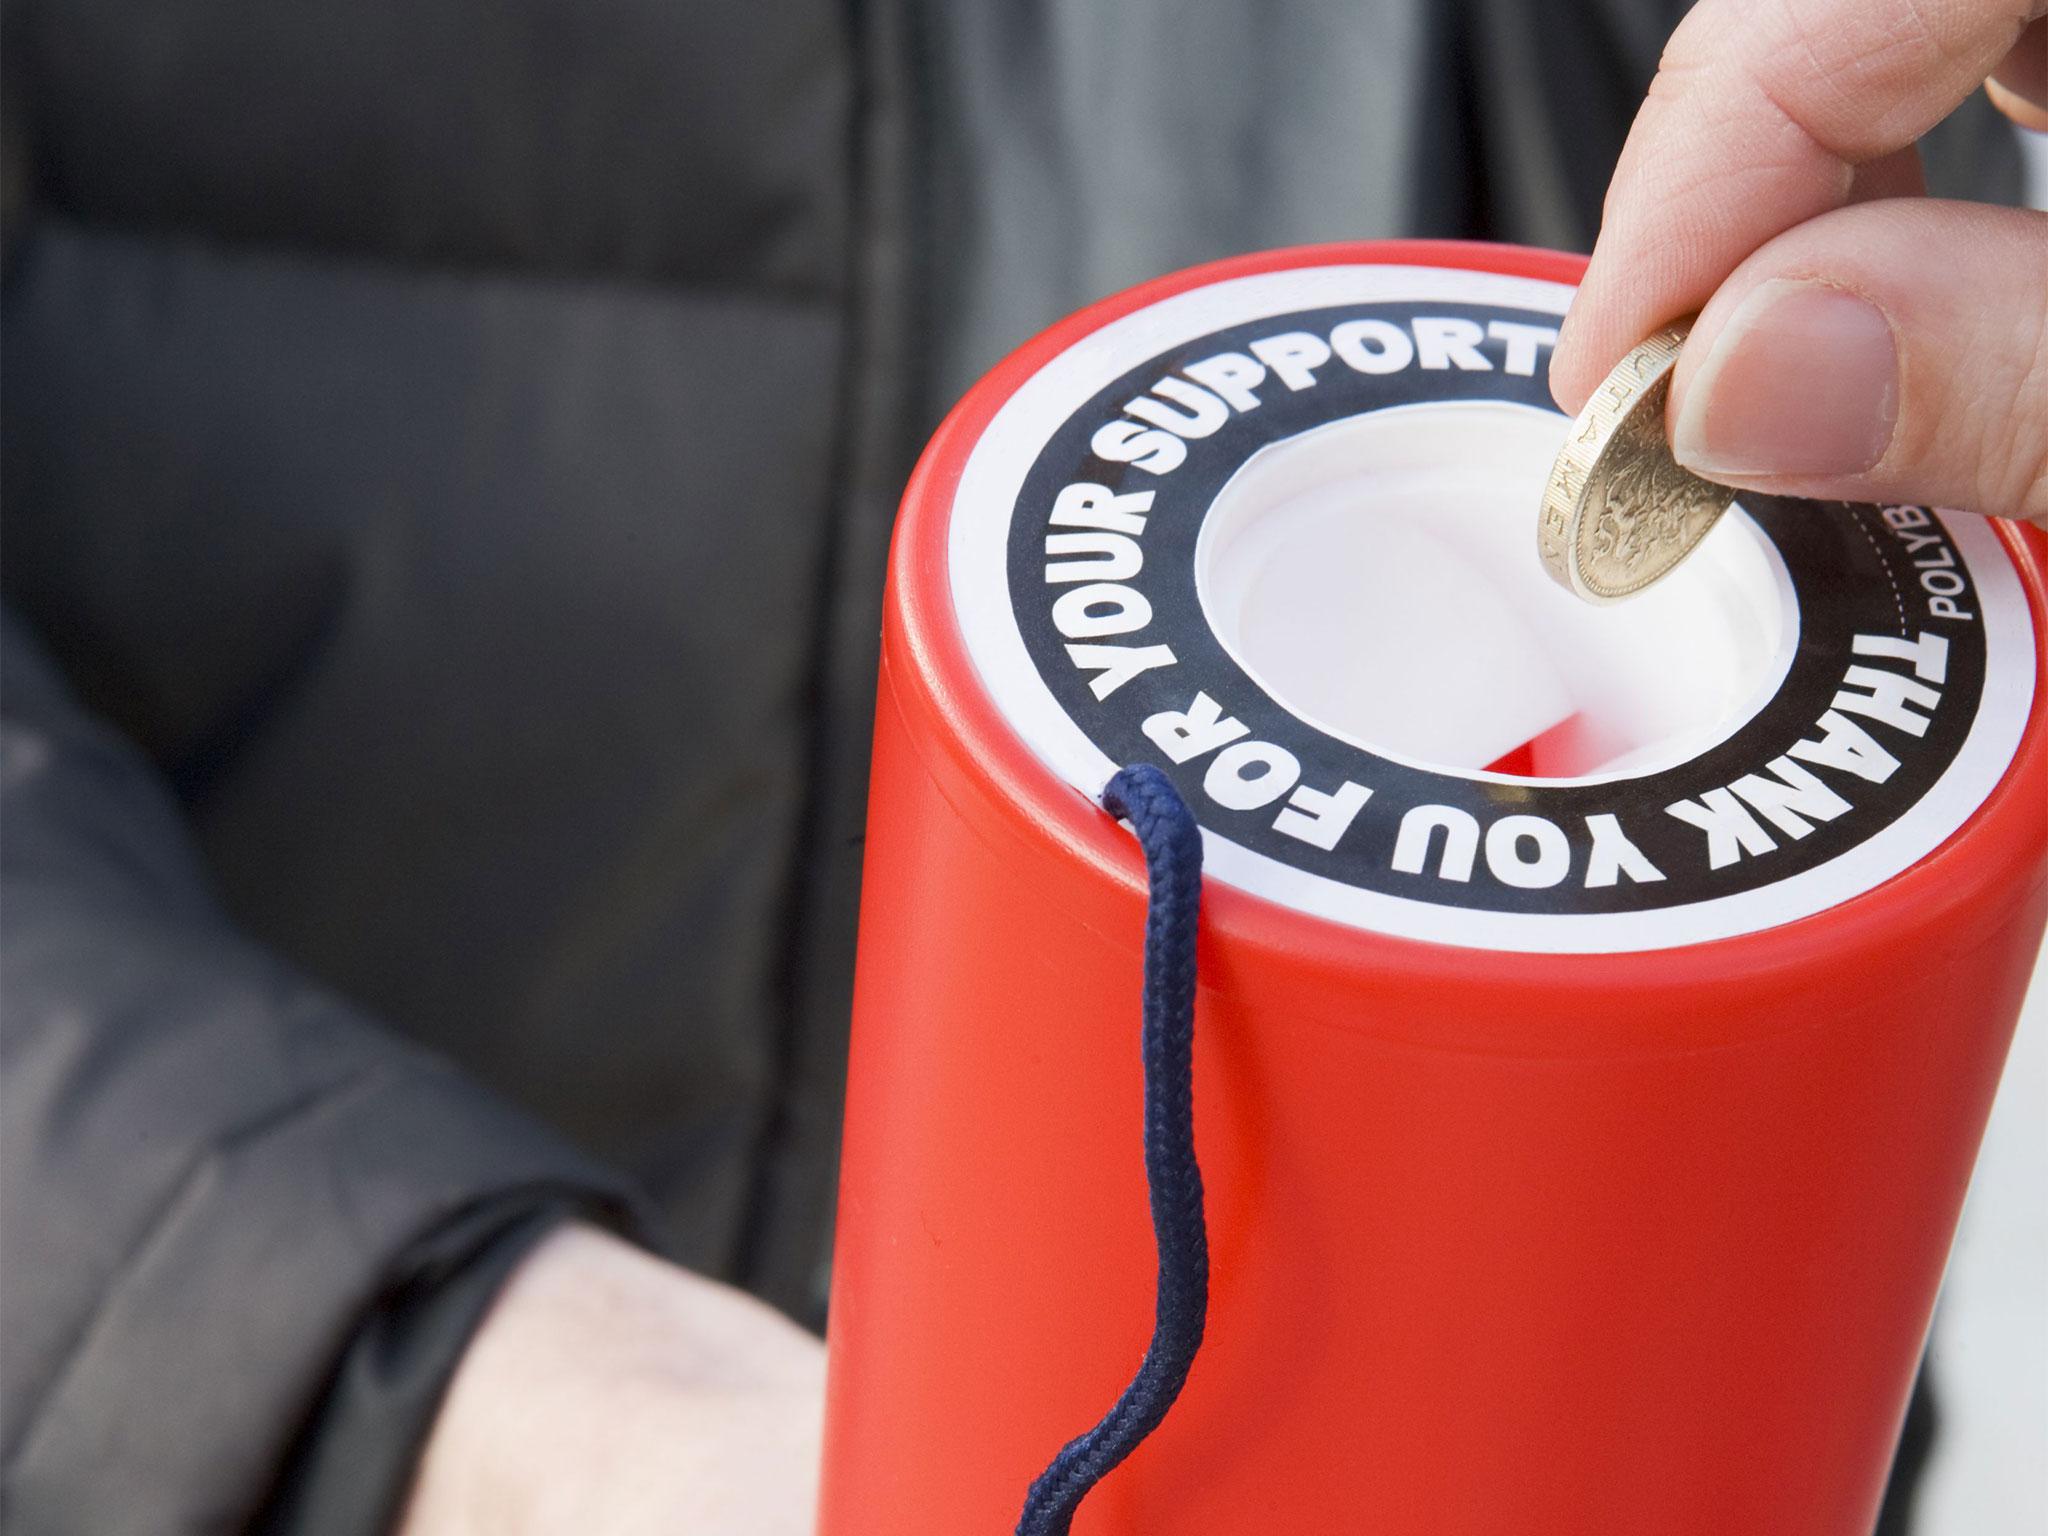 How To Give Without Giving Away The Independent - donation middlemen take a far greater cut of charitable giving than most of us realise